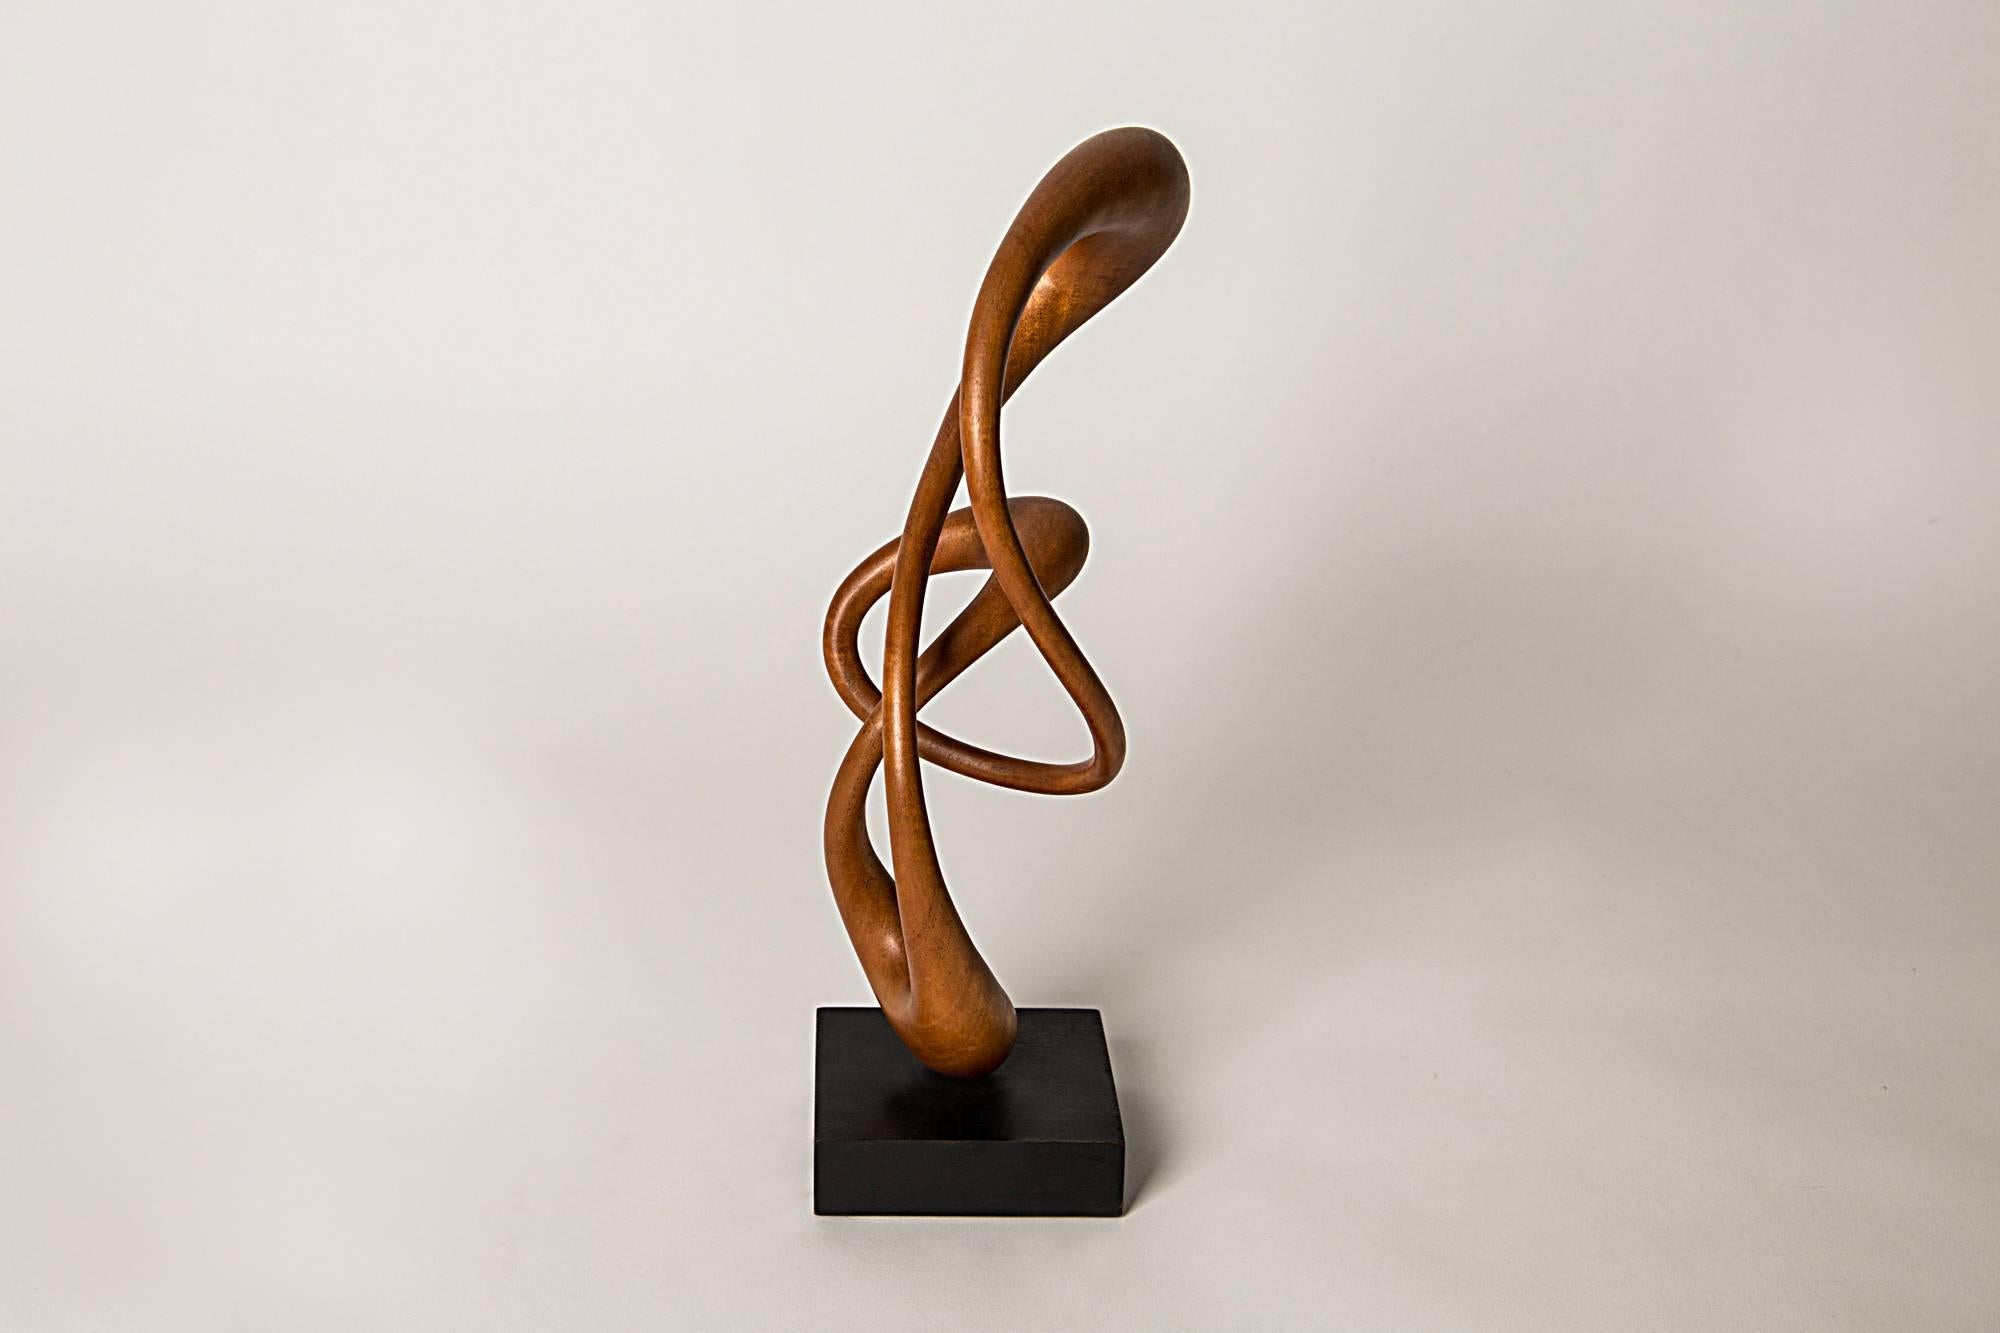 Inspired by a puff of smoke, hand-carved and sculpted from a single block of Elm.

The artist:
Born in Welwyn Garden City in 1944. Having exhibited mainly in Britain and a member of the exhilarating Hertfordshire Visual Art Form, sculpting for